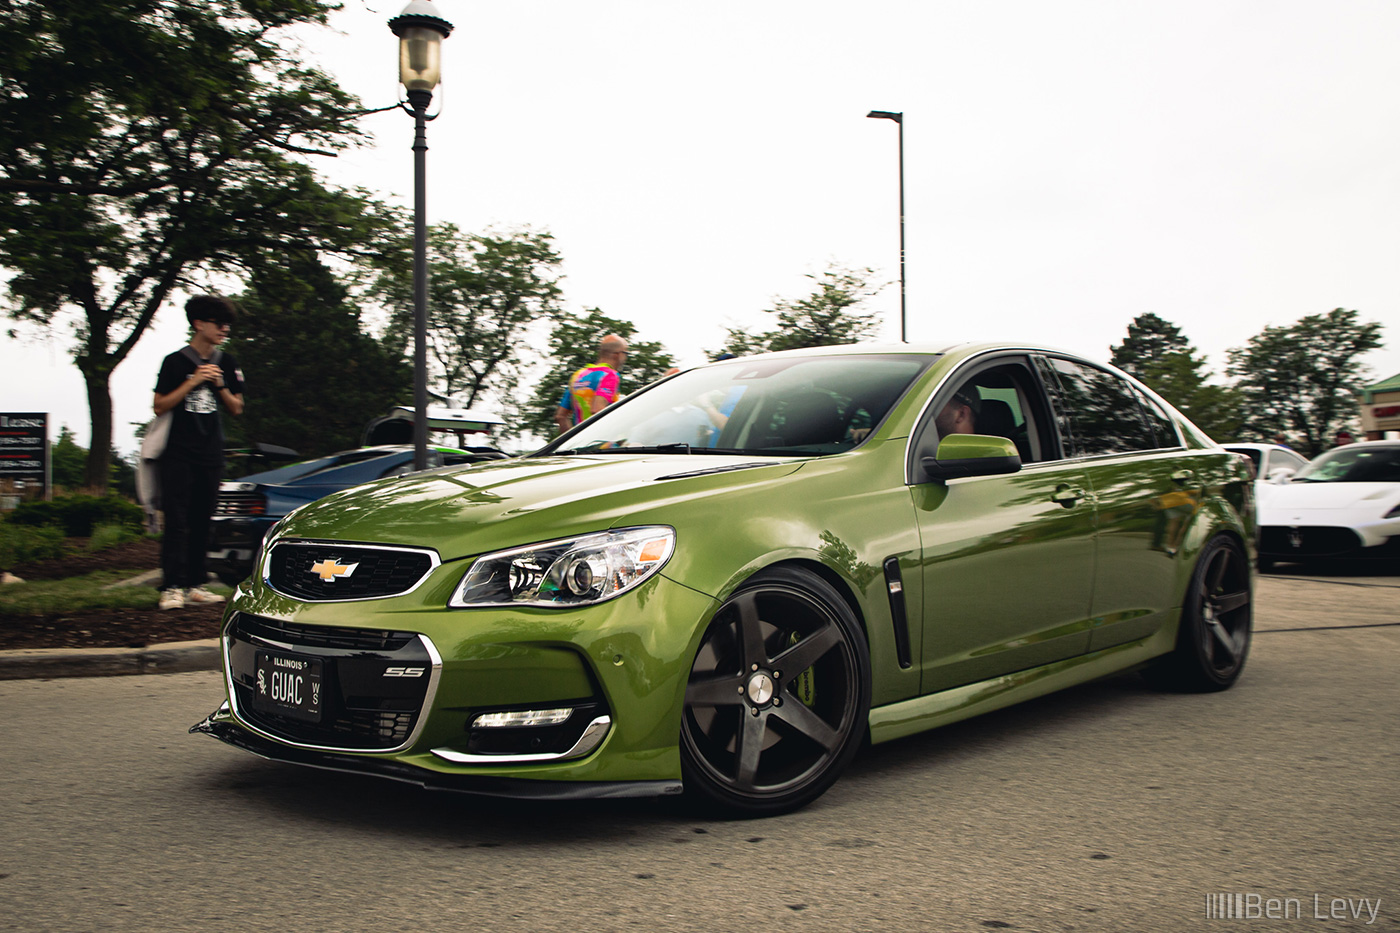 Green Chevy SS at Cars and Coffee in Wester Springs